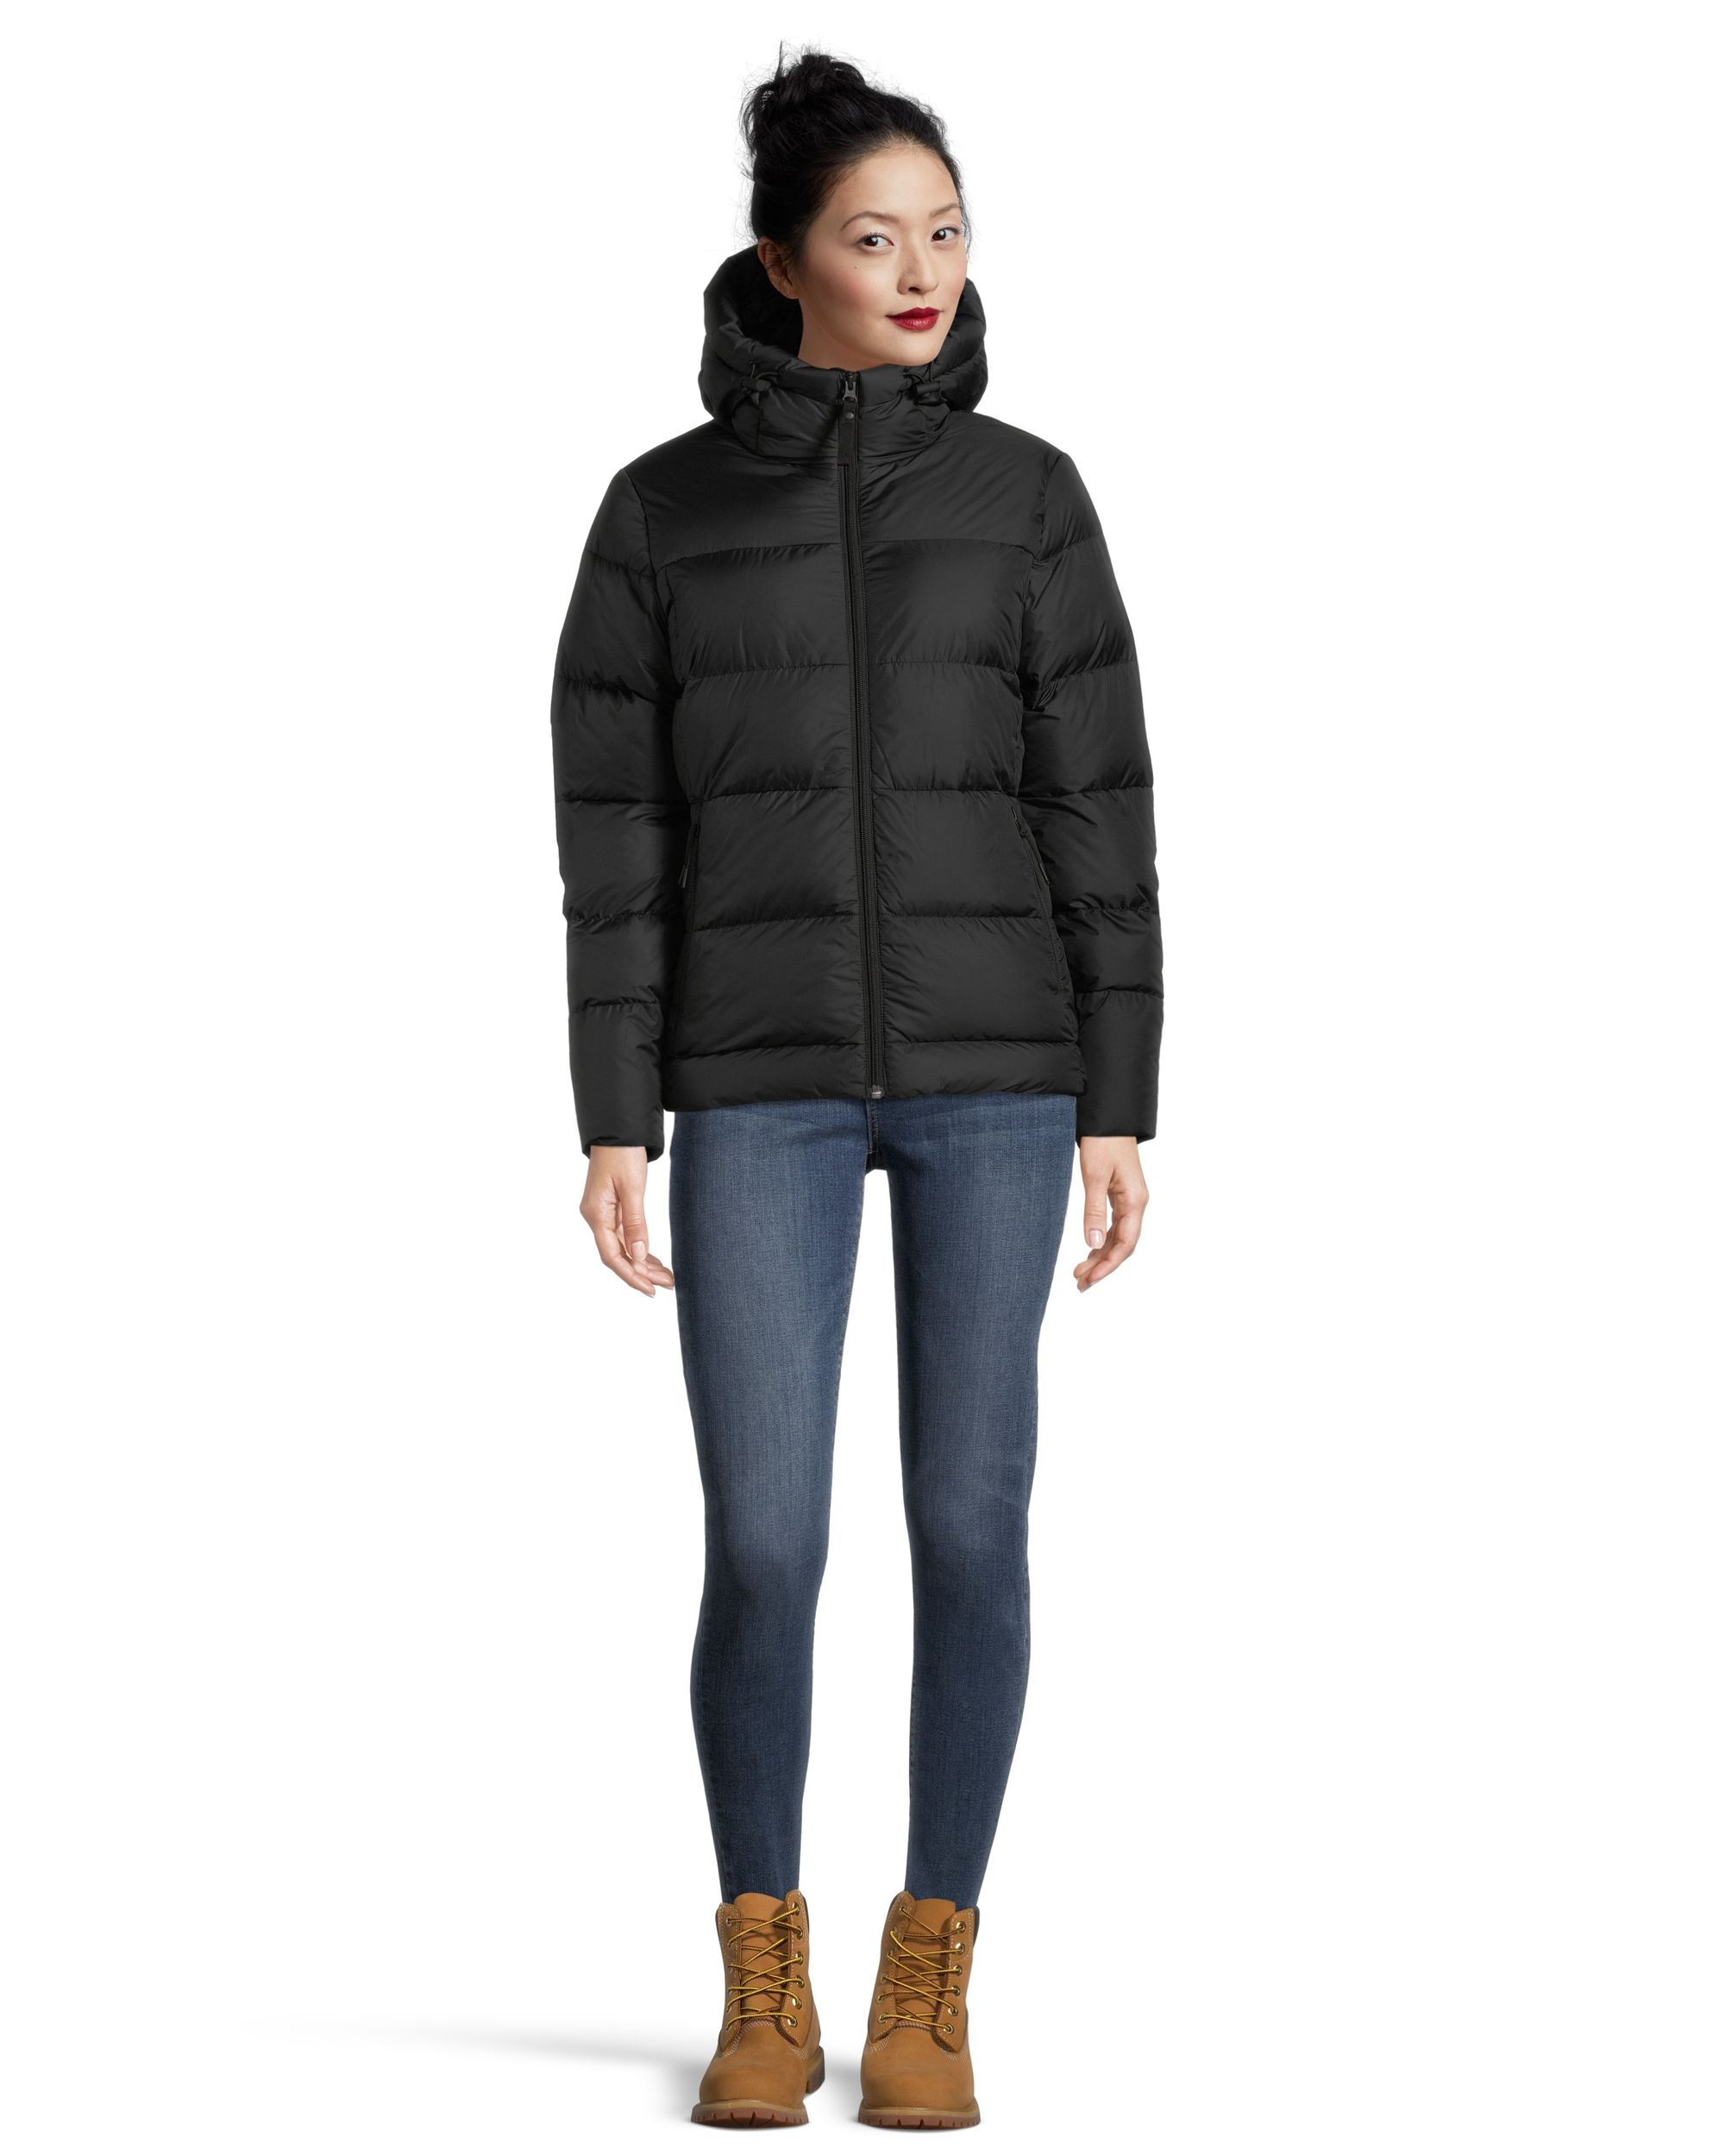 https://media-www.atmosphere.ca/product/div-03-softgoods/dpt-76-outerwear/sdpt-02-womens/333453898/helly-hansen-women-s-active-p-black-990-xs--f4f416aa-0229-44fd-a46f-0e3cca048e95-jpgrendition.jpg?imdensity=1&imwidth=1244&impolicy=mZoom